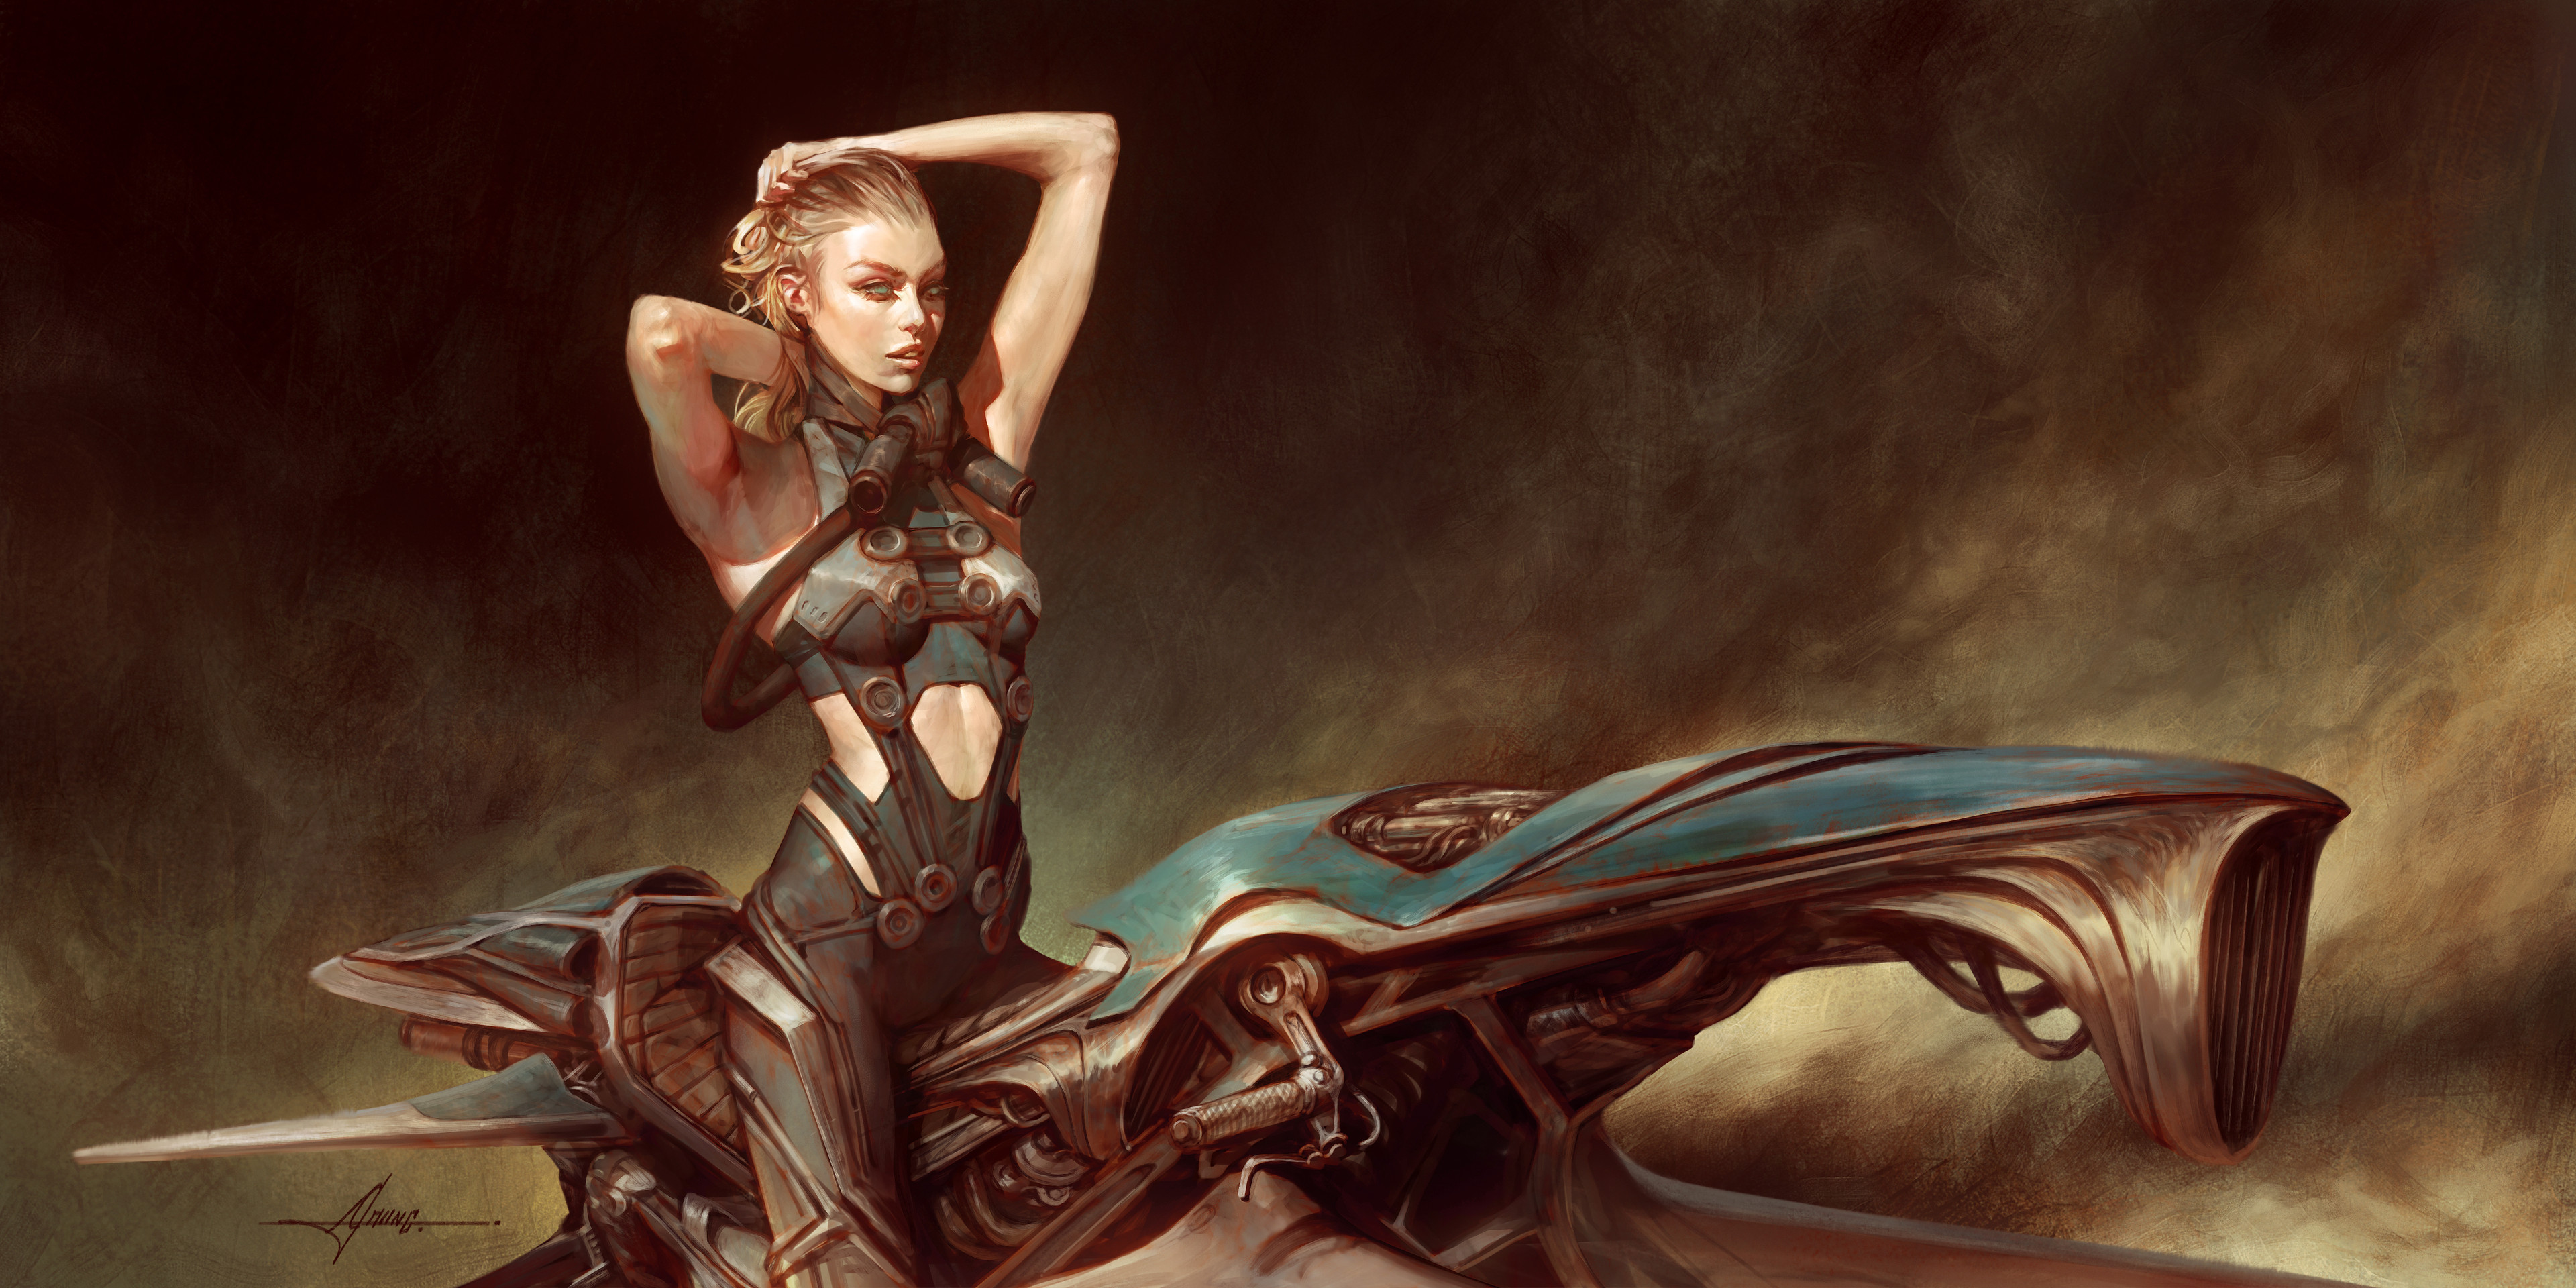 General 3840x1920 Christophe Young armpits ArtStation digital art green eyes women women with motorcycles motorcycle hands on head digital painting blonde looking into the distance artwork open mouth science fiction